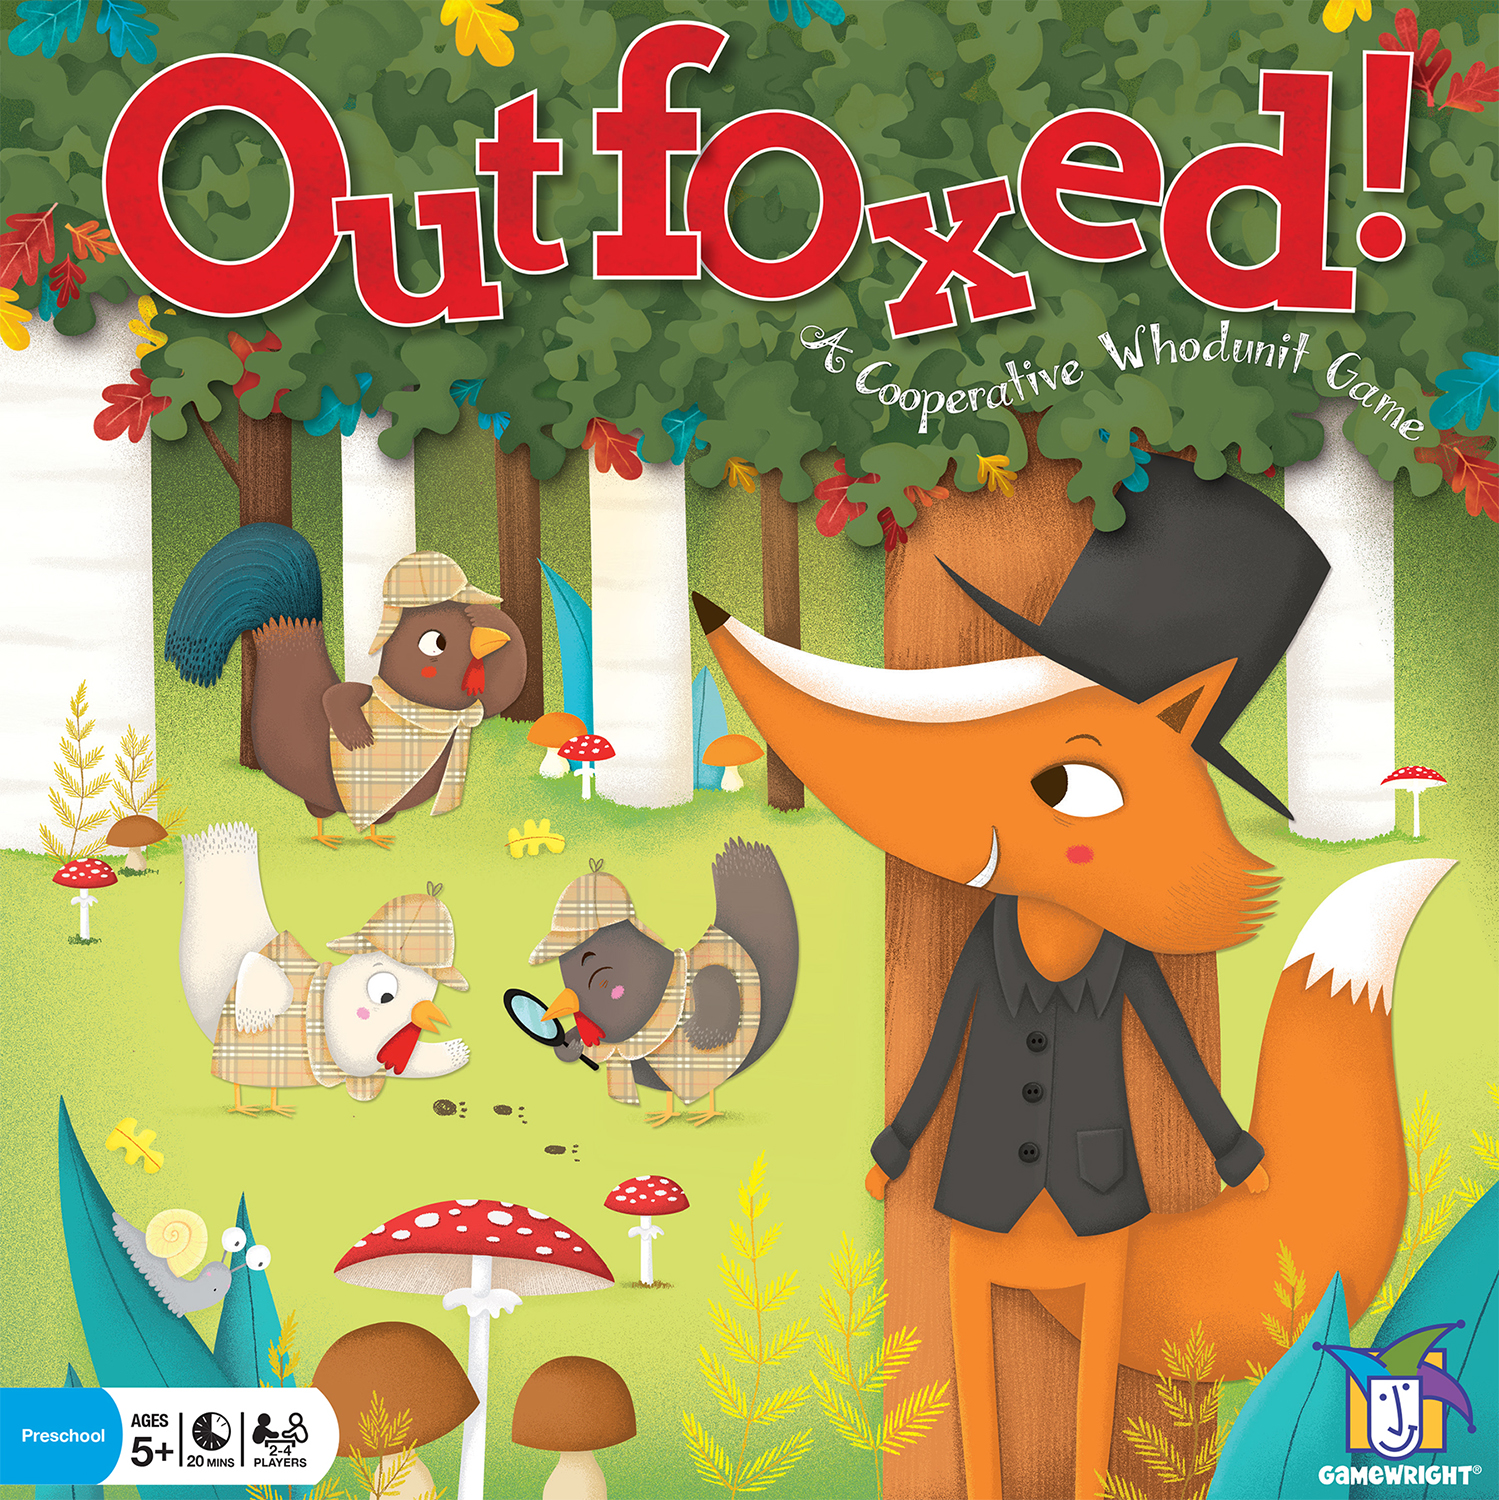 Outfoxed! Birthday Edition Board Game, by Gamewright - image 1 of 2